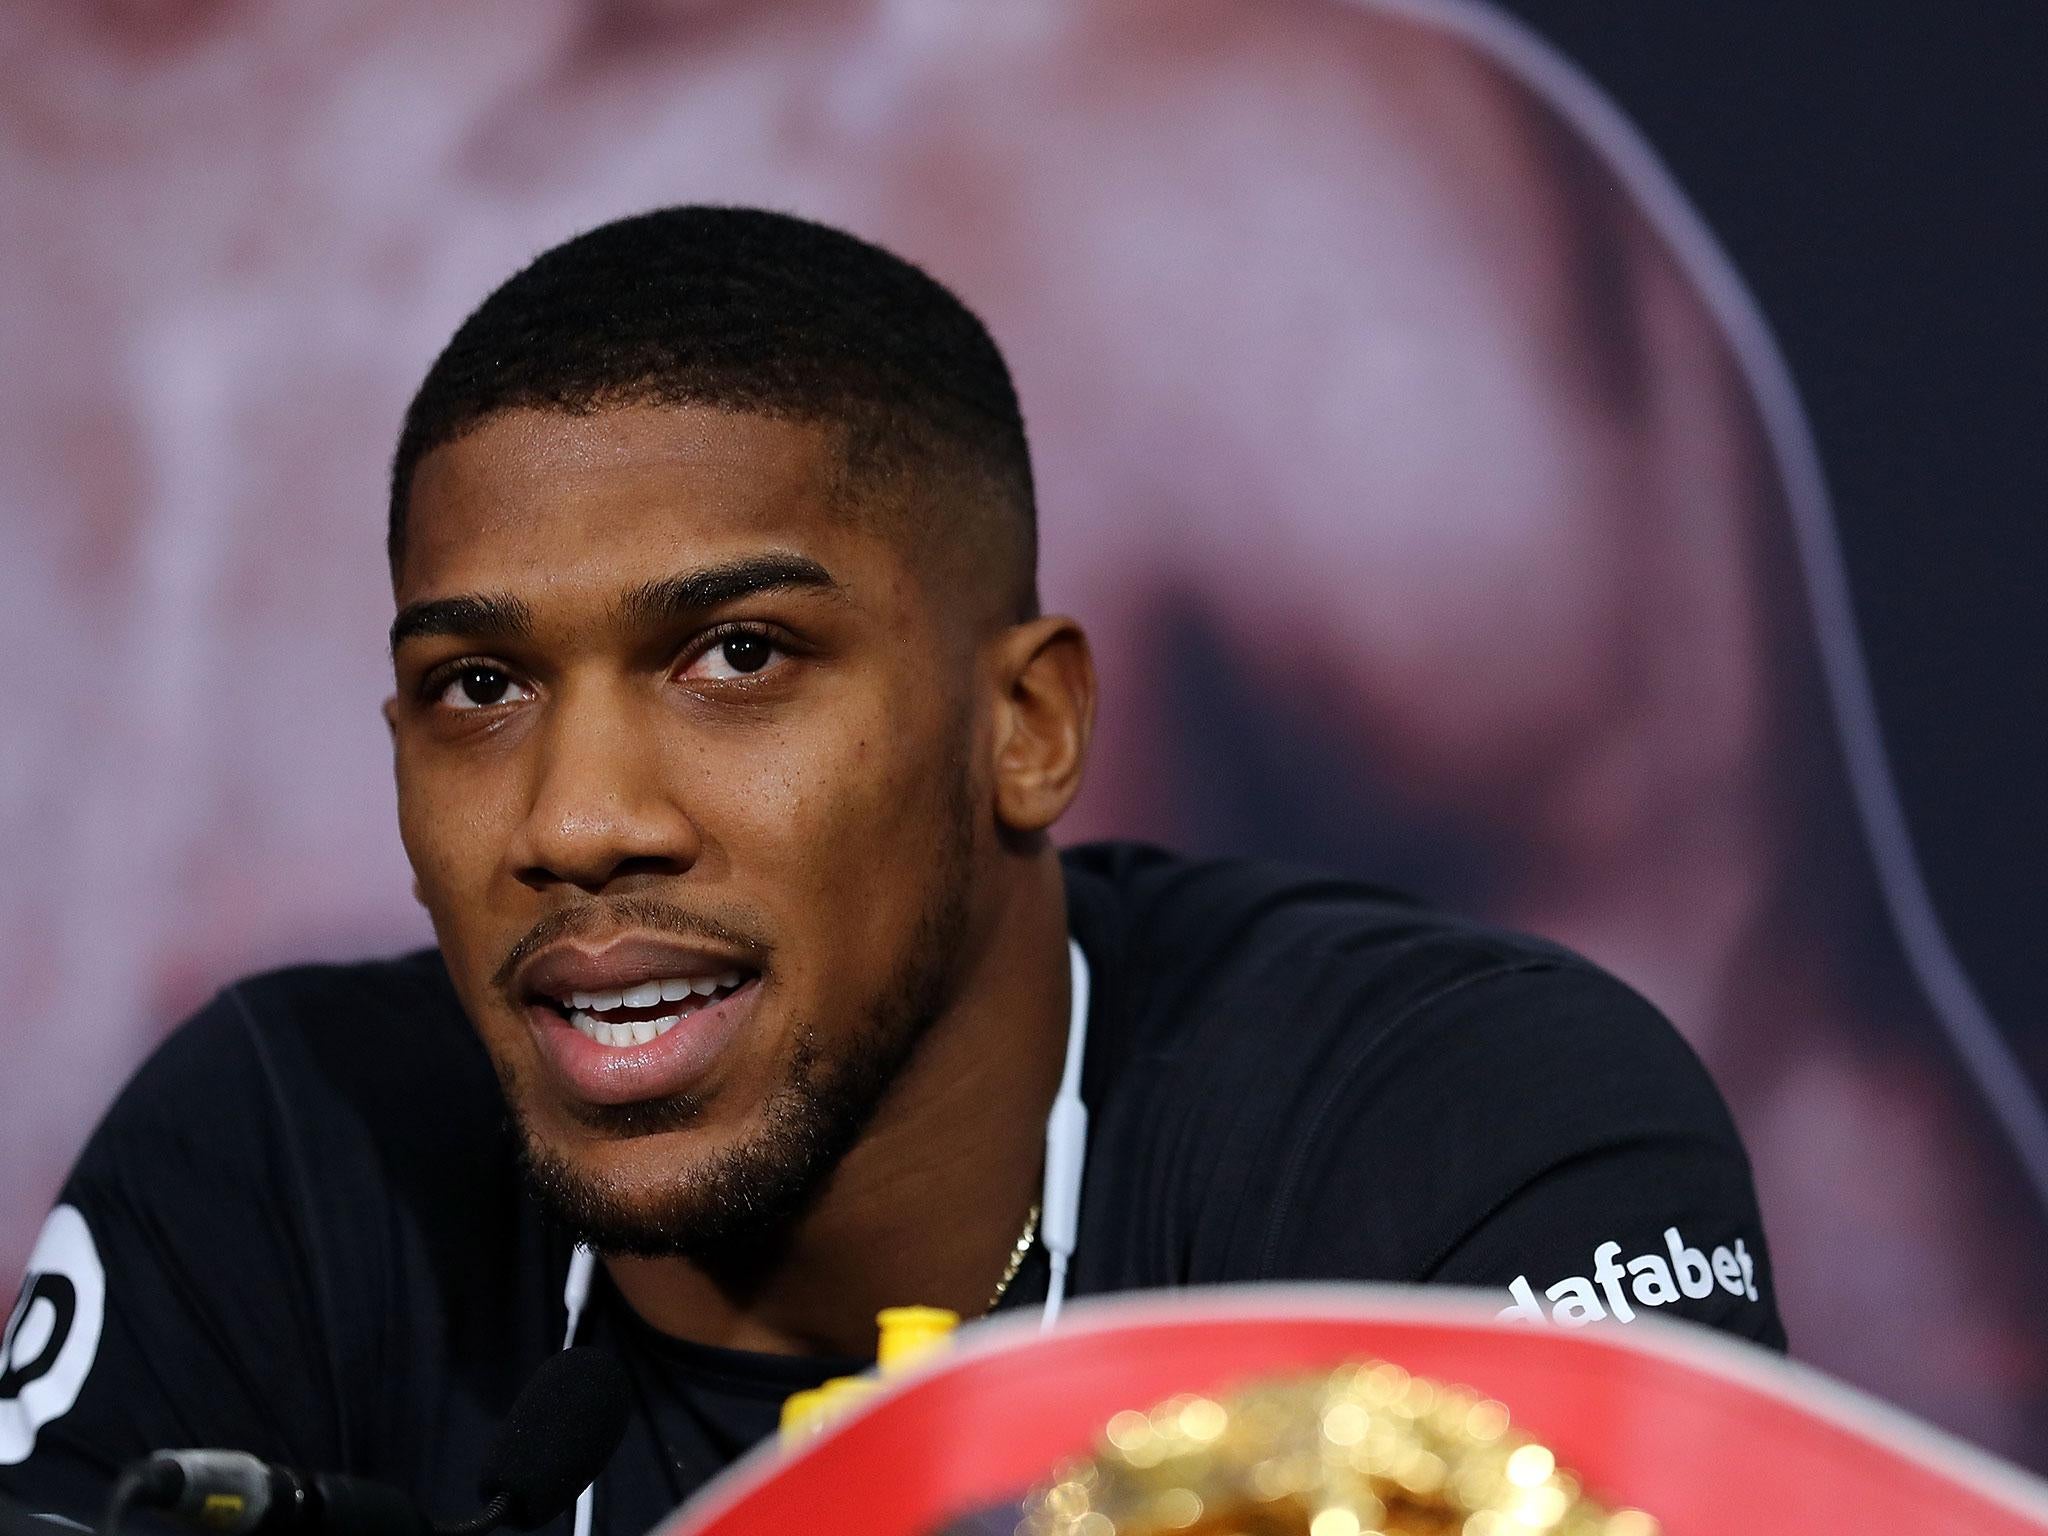 Anthony Joshua correctly predicted Dillian Whyte's sixth-round stoppage of Lucas Browne at the weekend